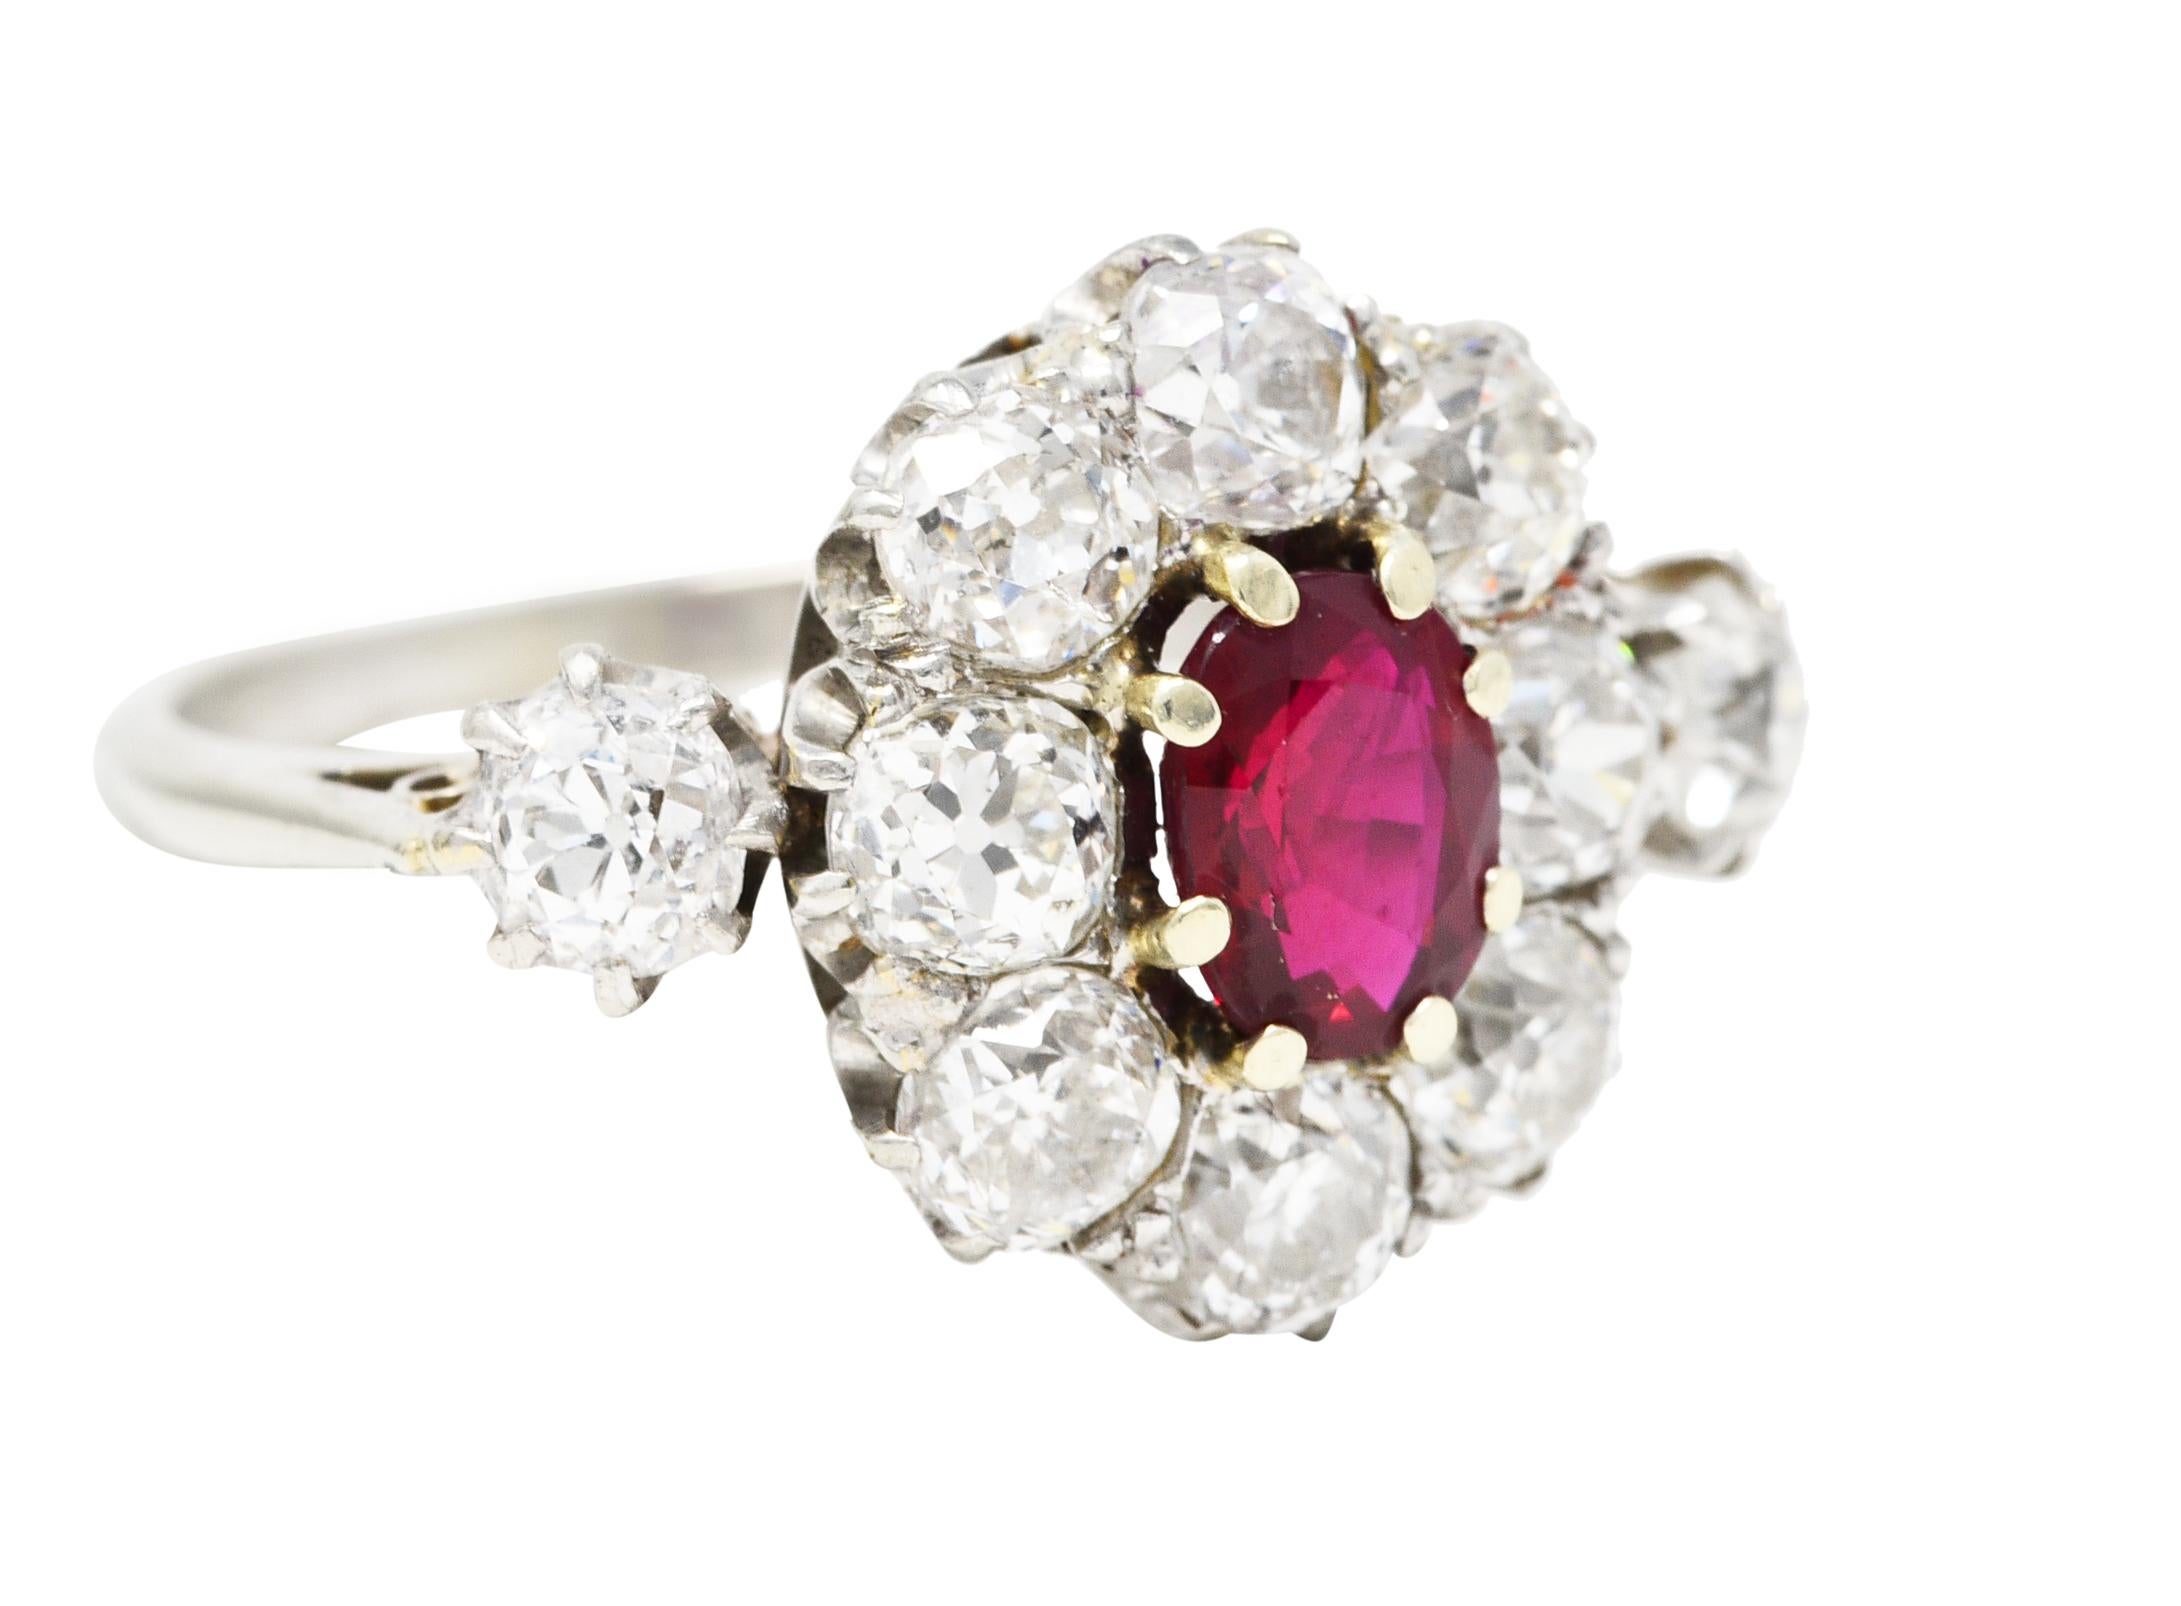 Cluster ring centers an oval cut ruby weighing approximately 0.70 carat. Eye clean with vivid red color then set with yellow gold prongs. Surrounded by a halo of old mine cut diamonds with two additional at each shoulder. Weighing collectively